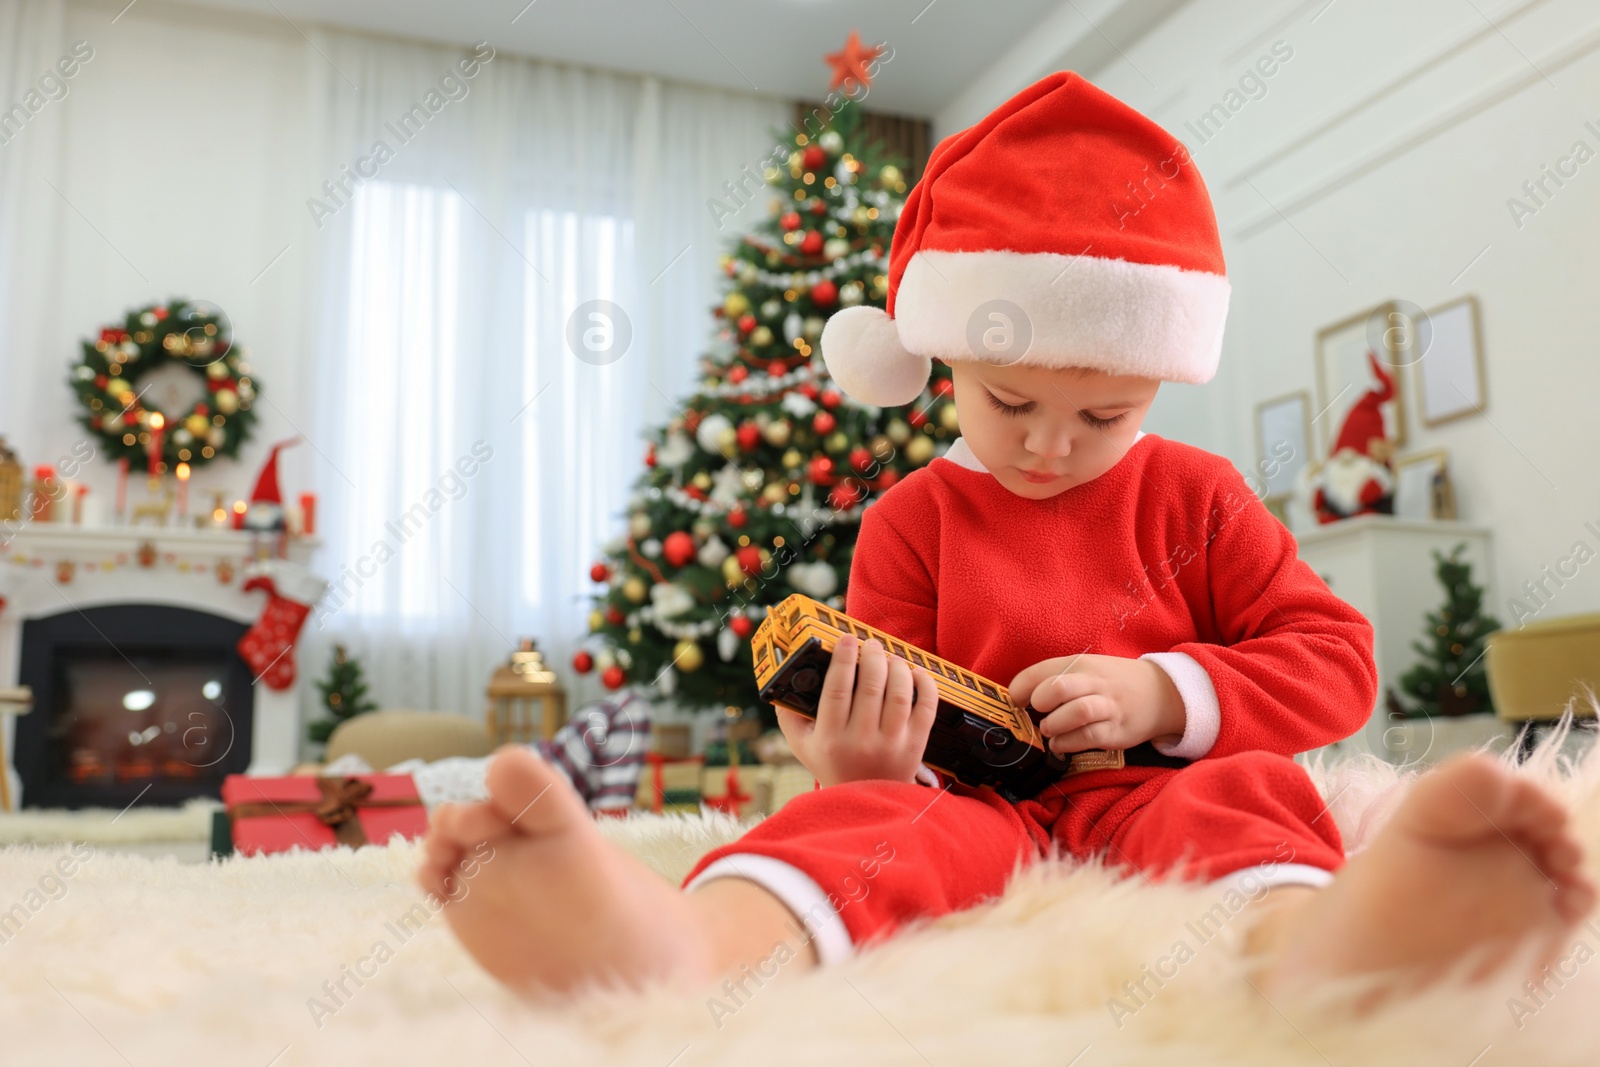 Photo of Cute little boy with toy car in room decorated for Christmas, low angle view